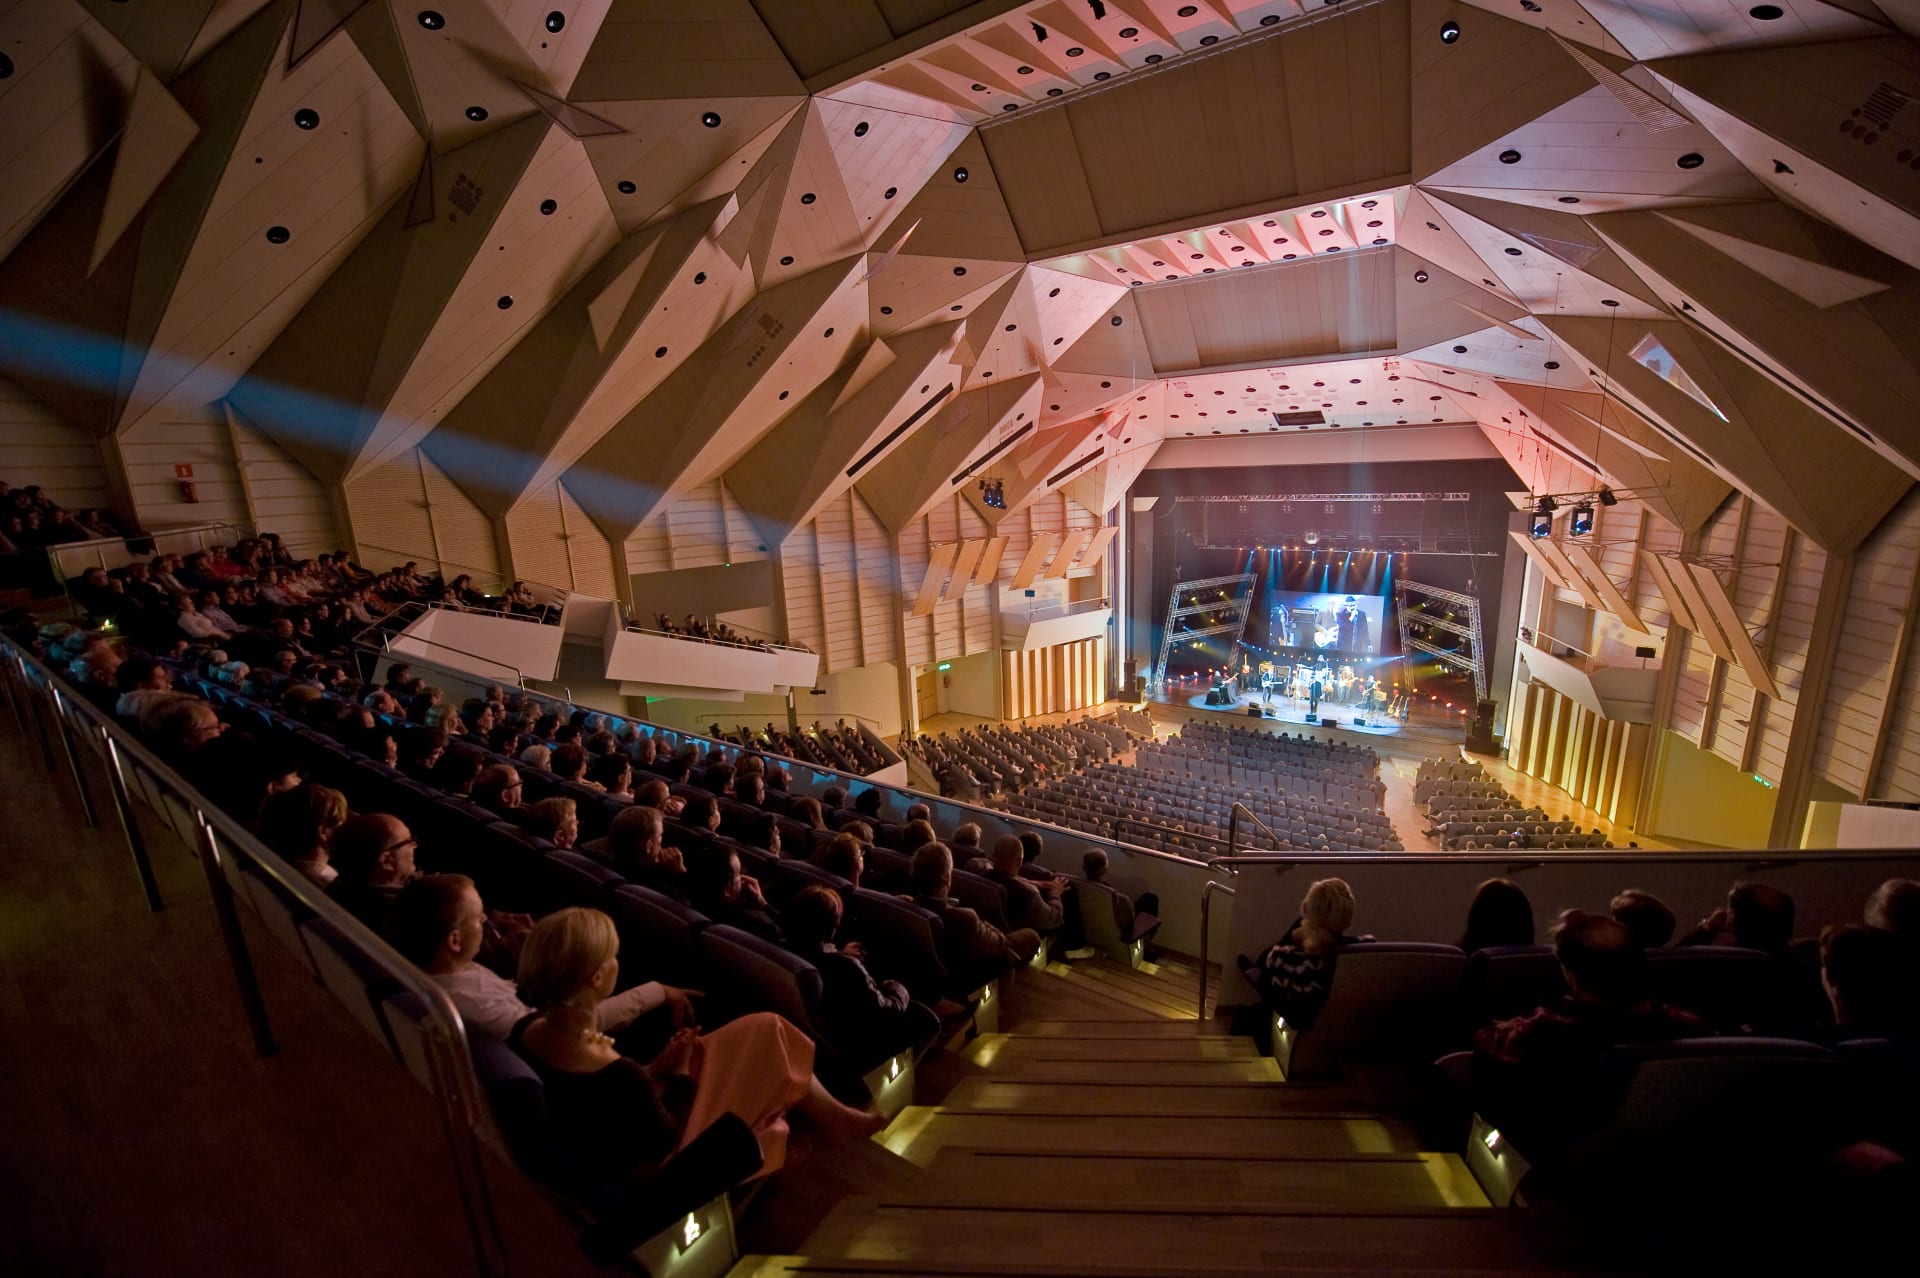 Tampere Hall’s Main auditorium hosts a large number of top Finnish artists and international stars each year.